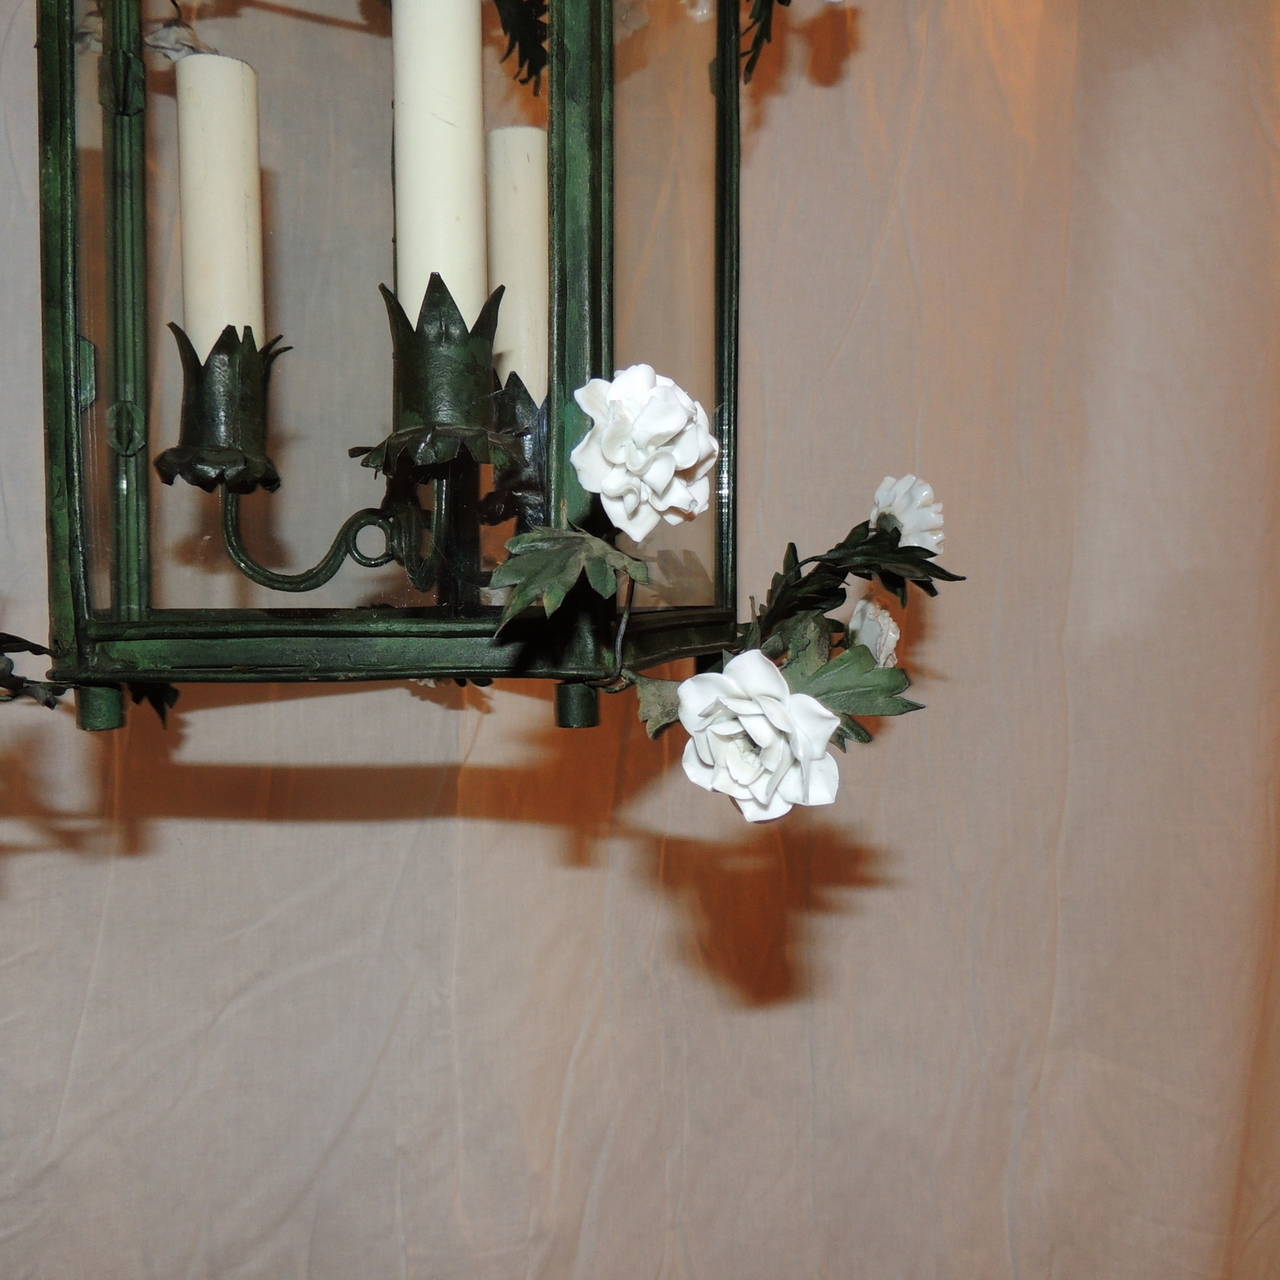 Mid-20th Century Wonderful French Green Tole Patina Lantern Three Lights and Porcelain Flowers